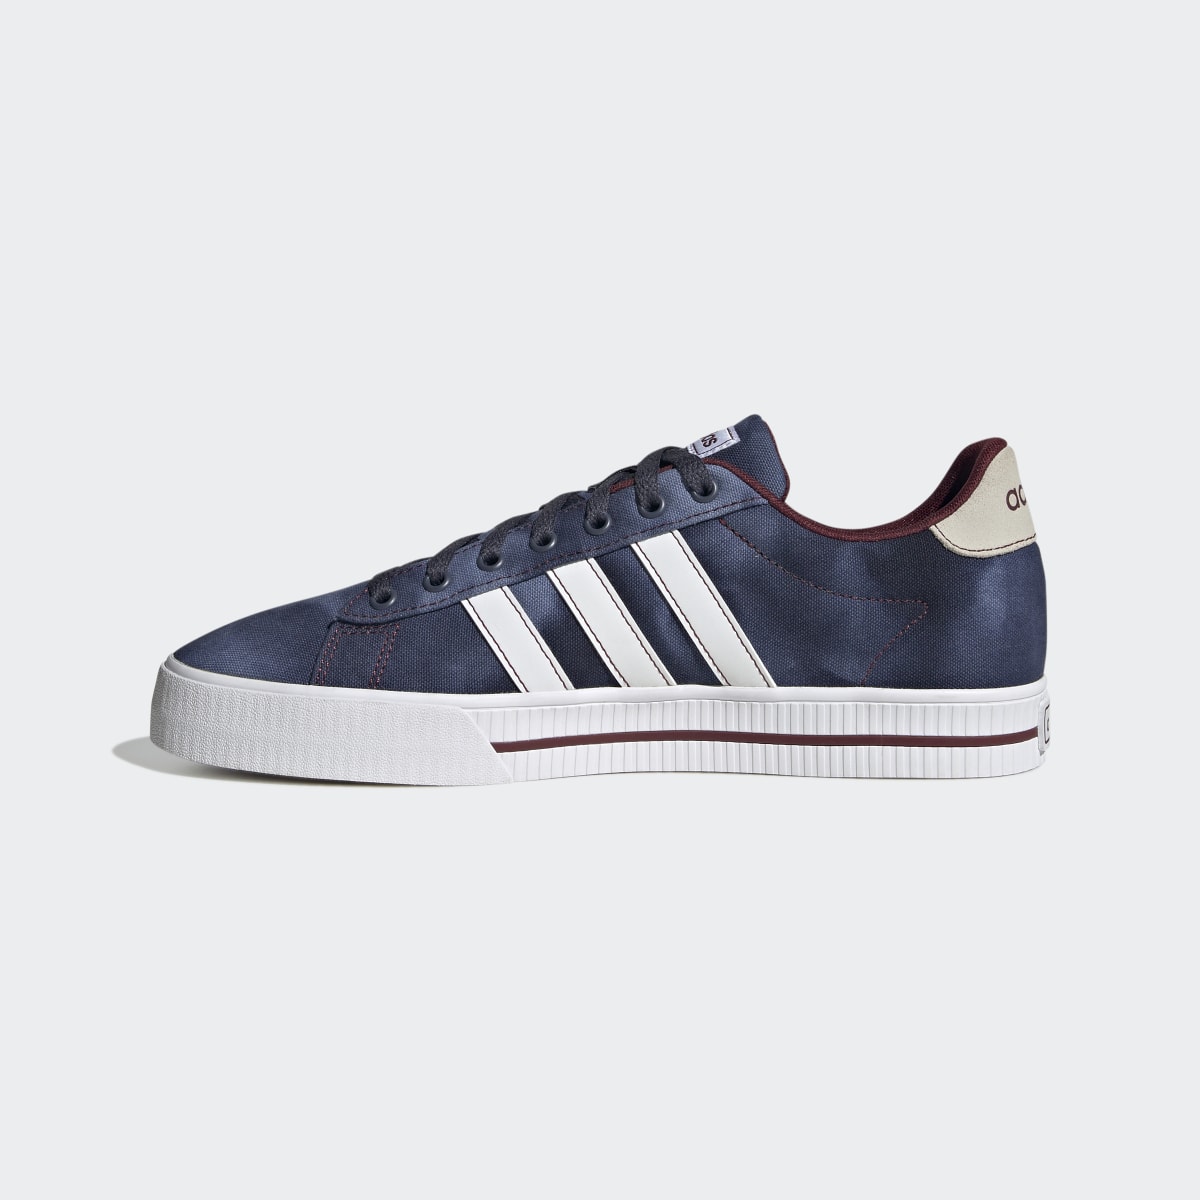 Adidas Daily 3.0 Lifestyle Skateboarding Suede Shoes. 7